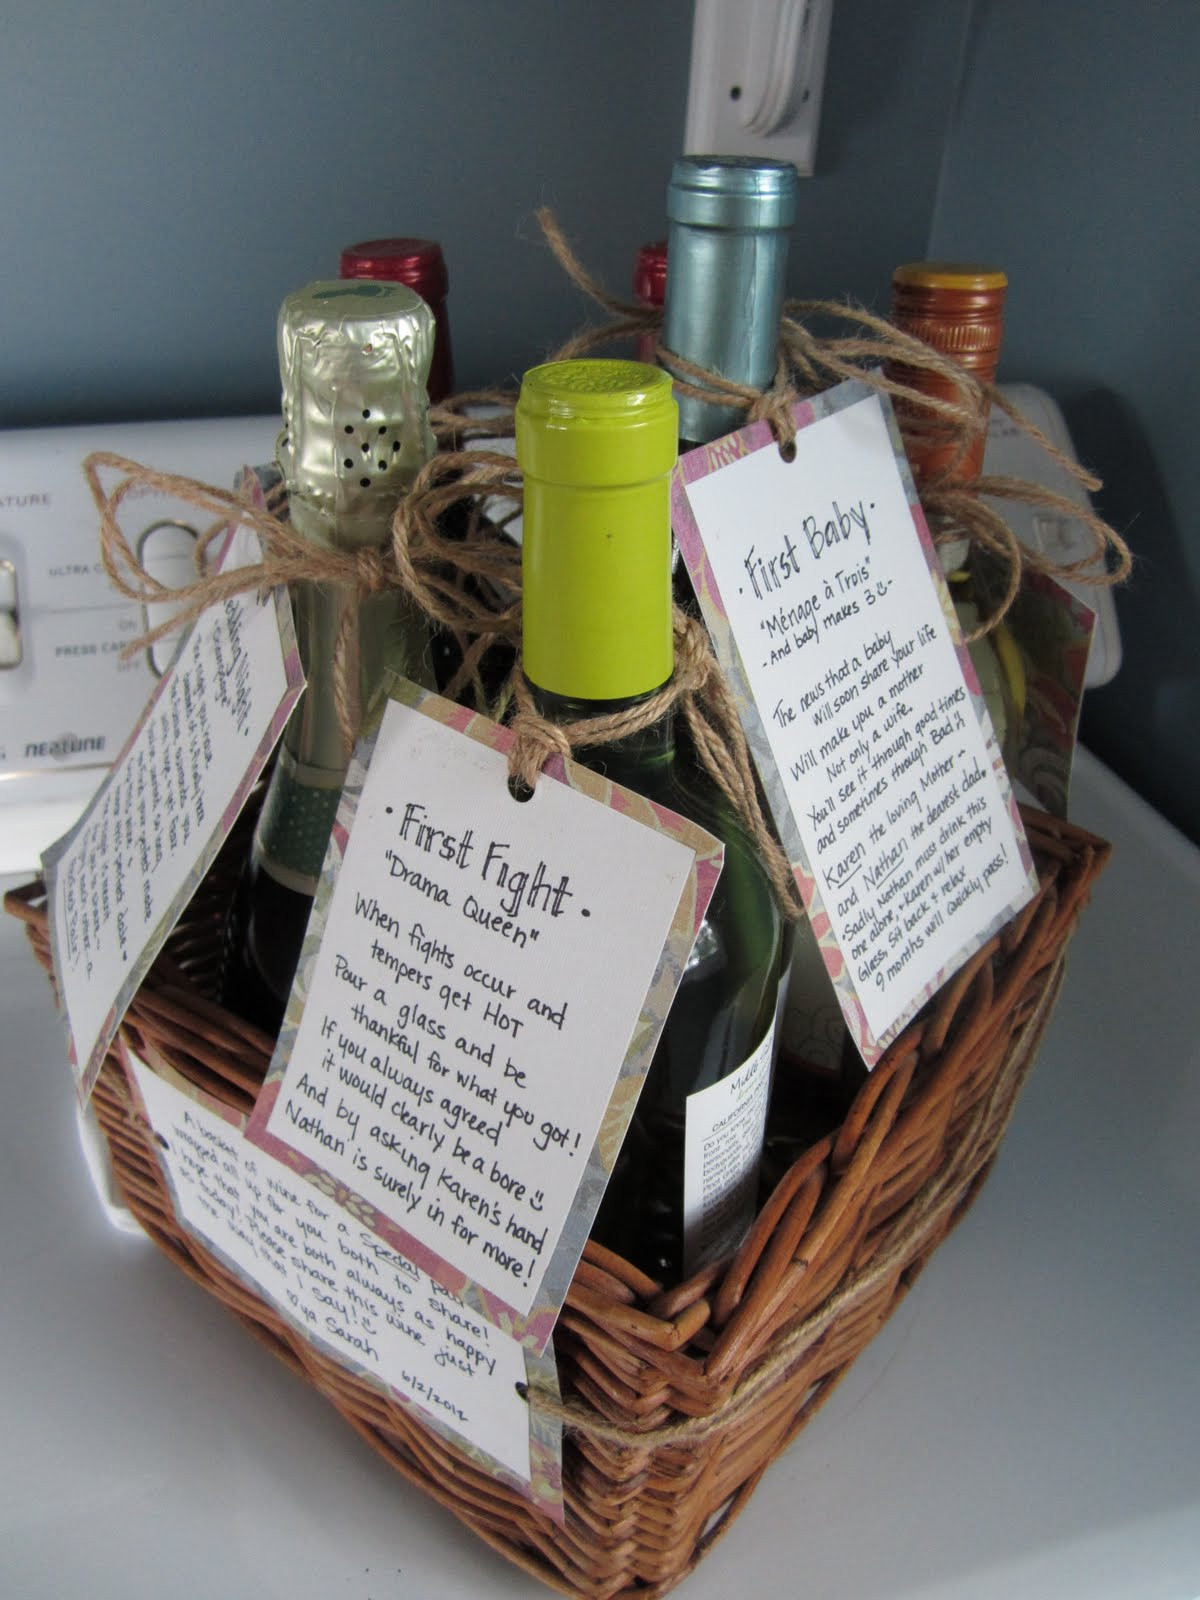 Engagement Gift Basket Ideas
 5 Thoughtful Wedding Shower Gifts that Might Not Be on the